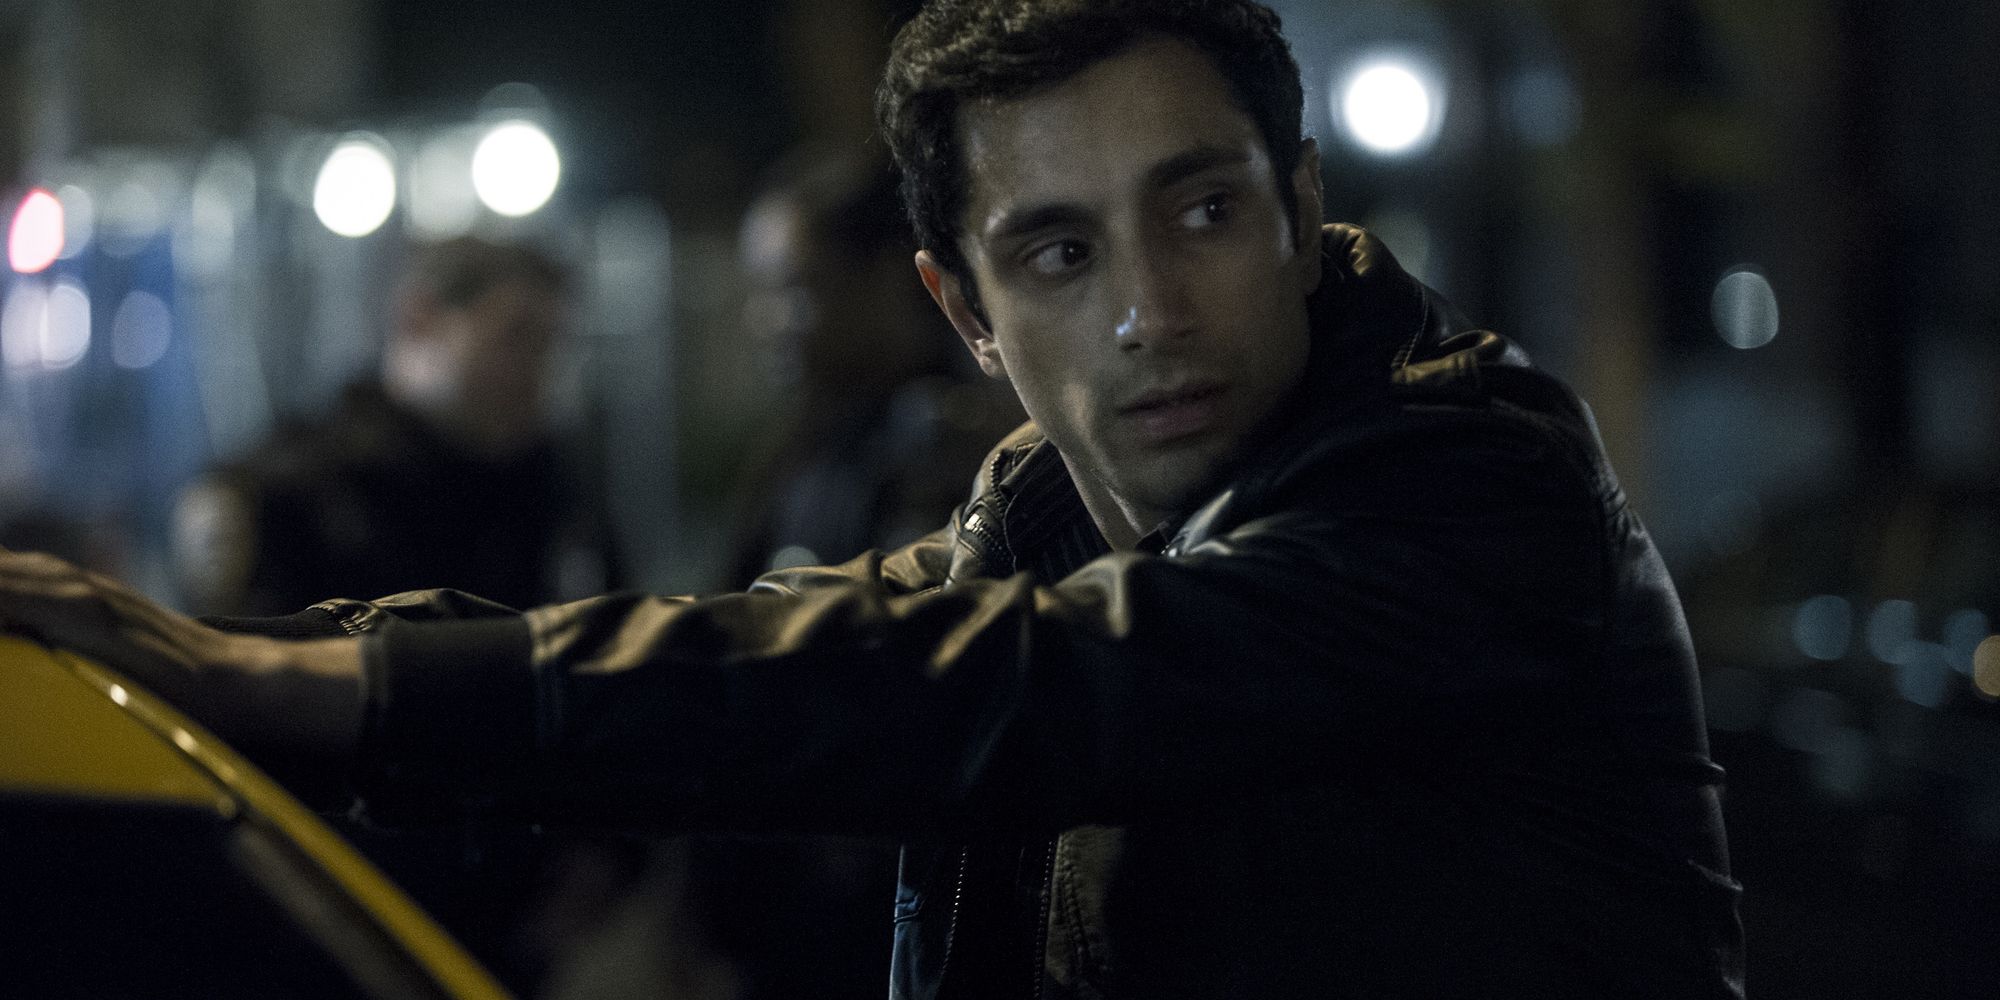 Riz Ahmed's character with his hands on the top of a car in The Night Of